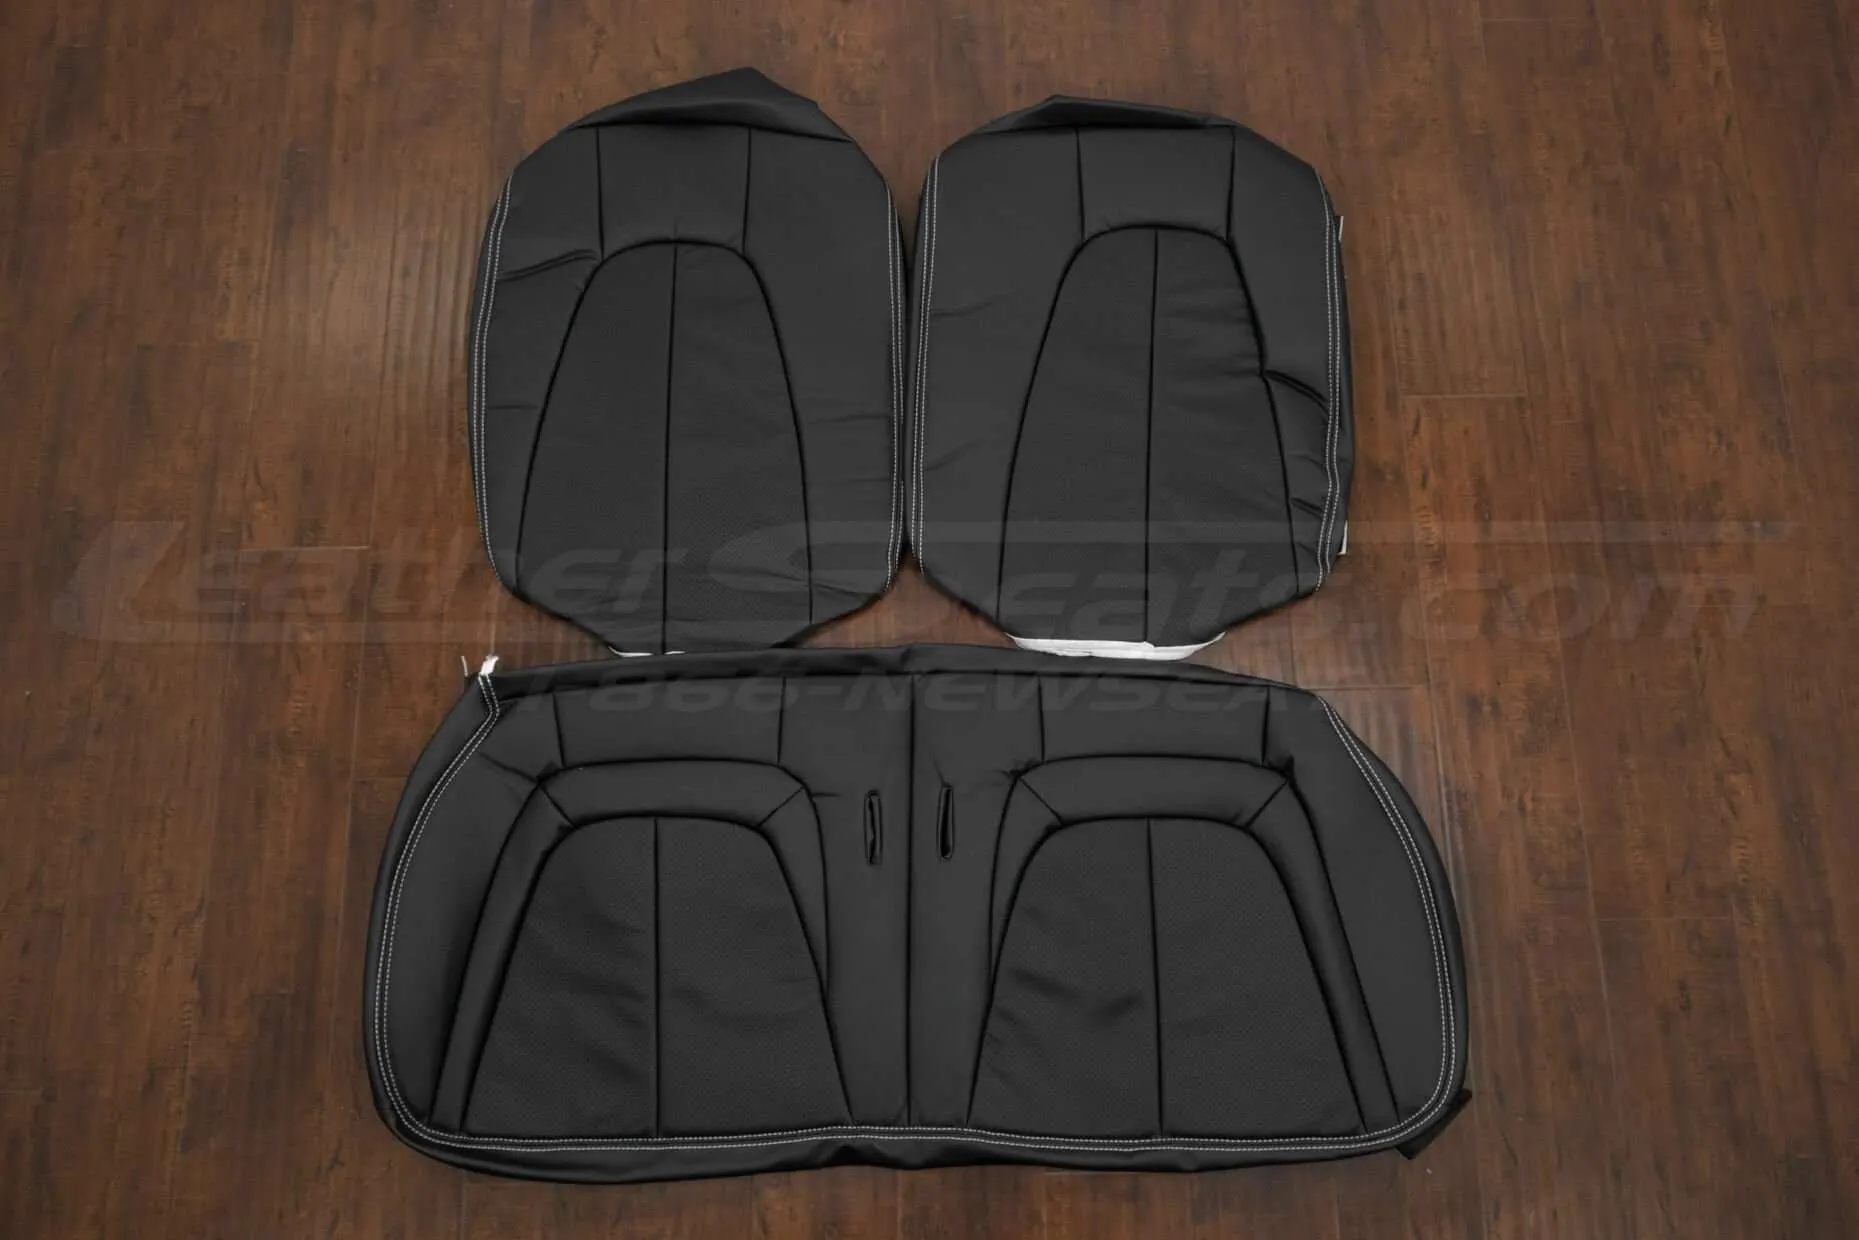 Ford Probe Leather Seat Upholstery Kit - Black - rear seat uphosltery